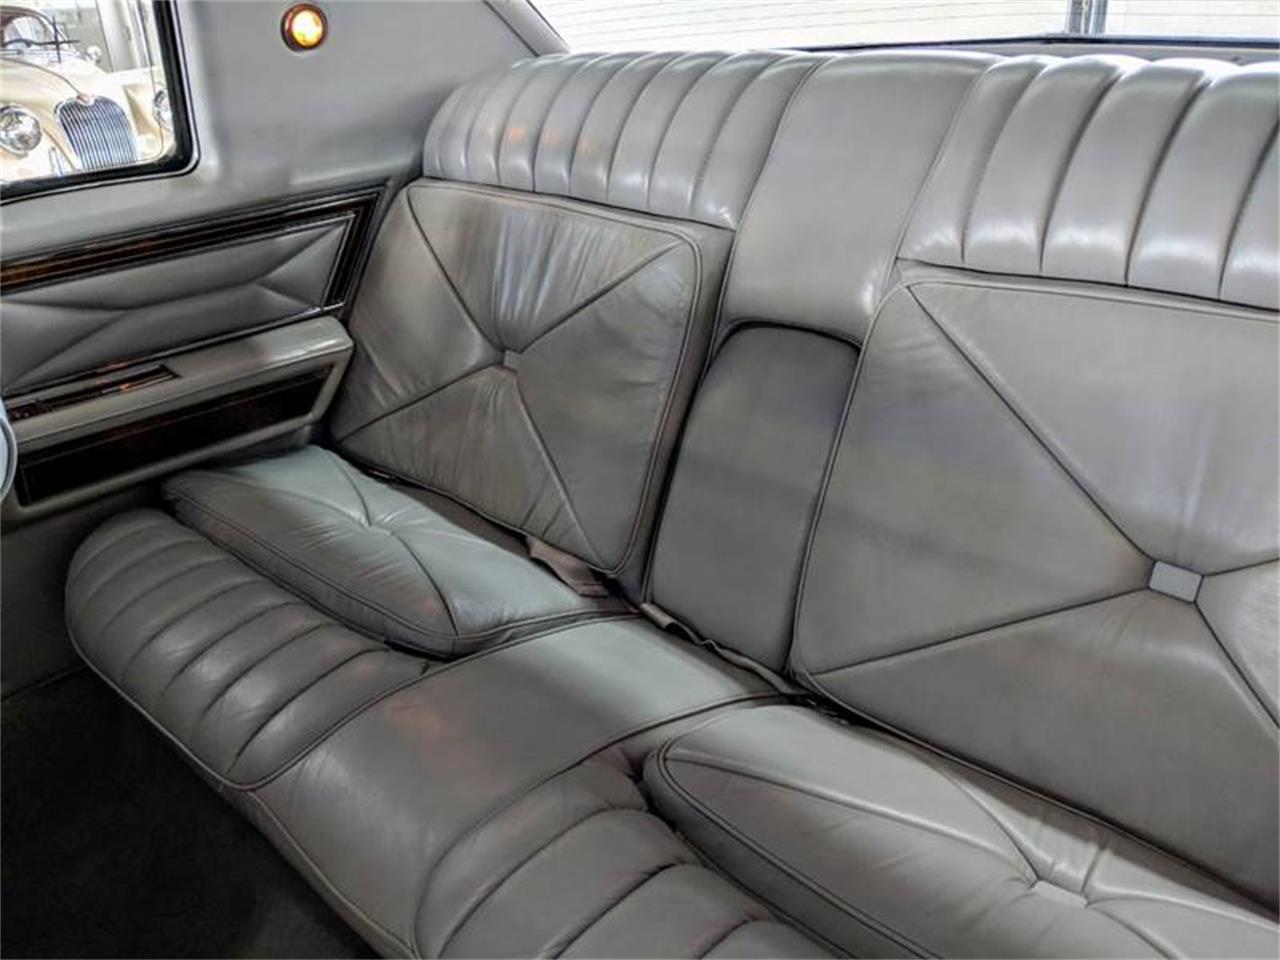 1977 Lincoln Mark V for sale in St. Charles, IL – photo 45